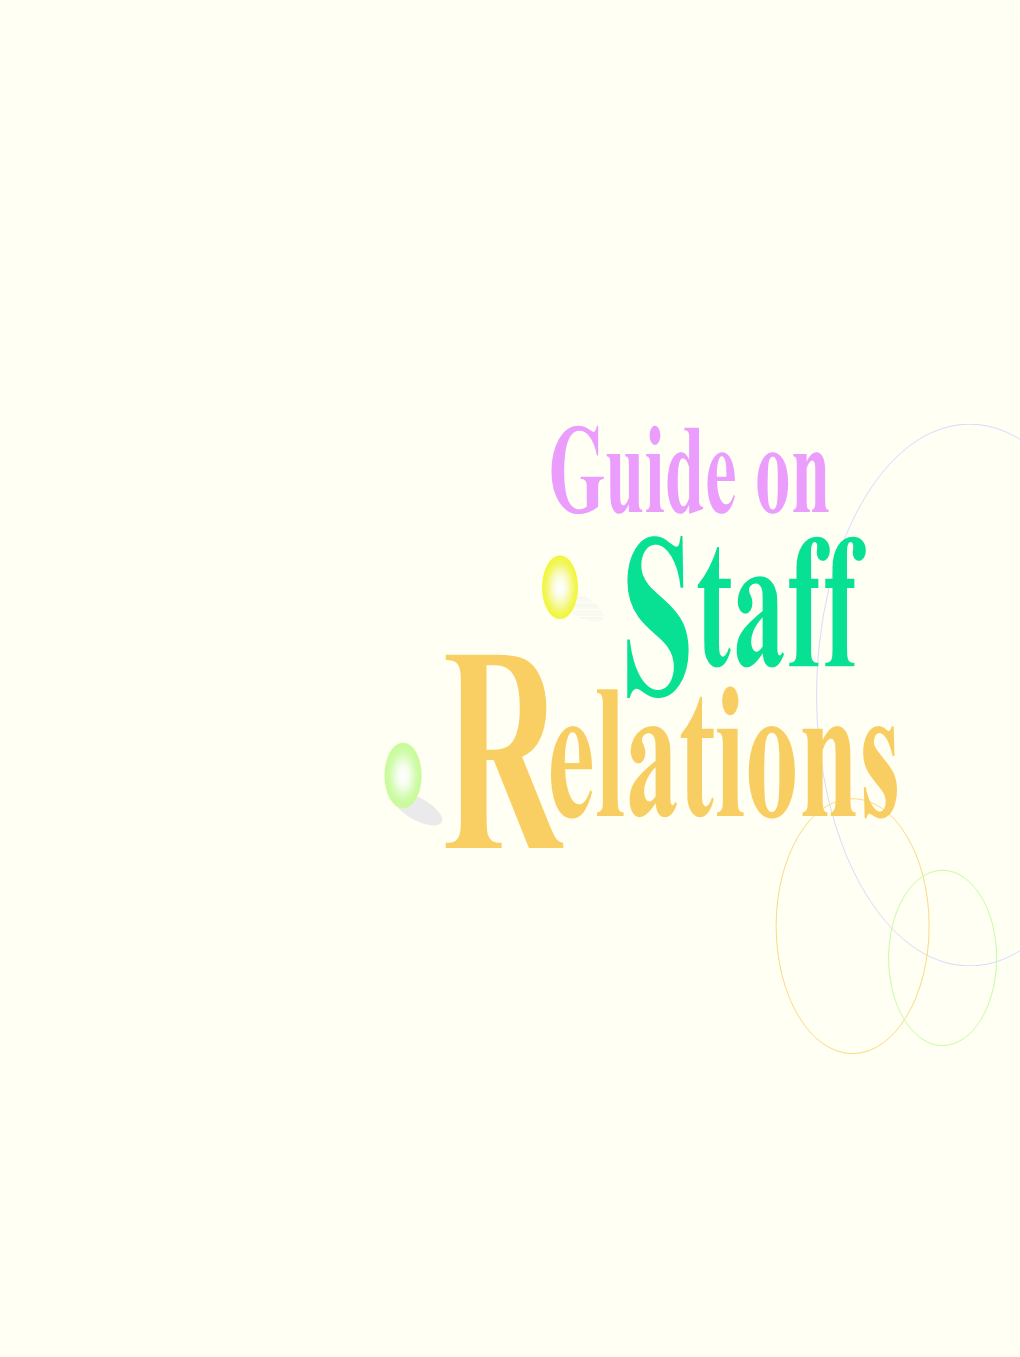 Guide on Staff Relations